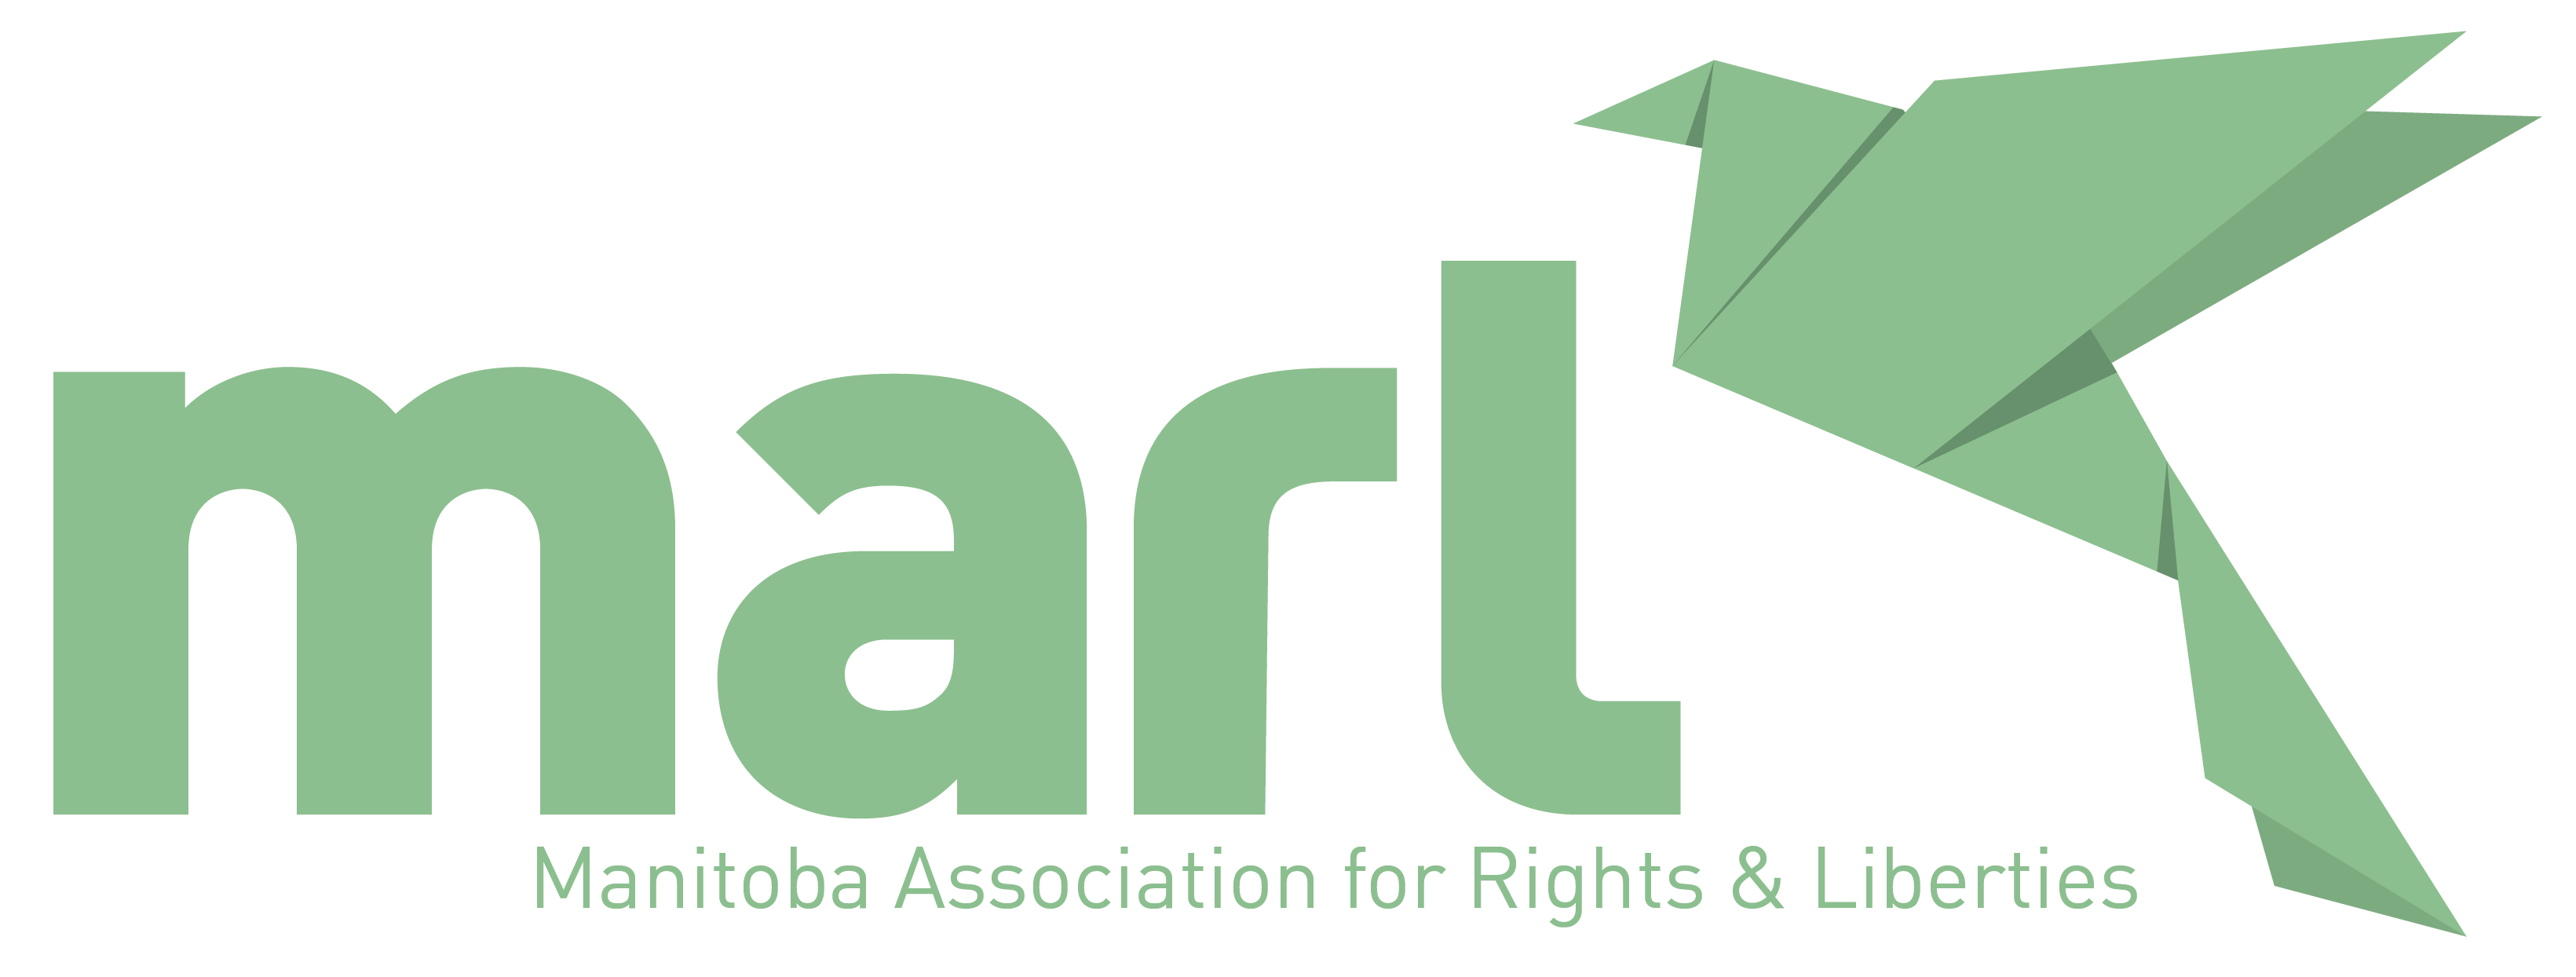 Manitoba Association for Rights and Liberties